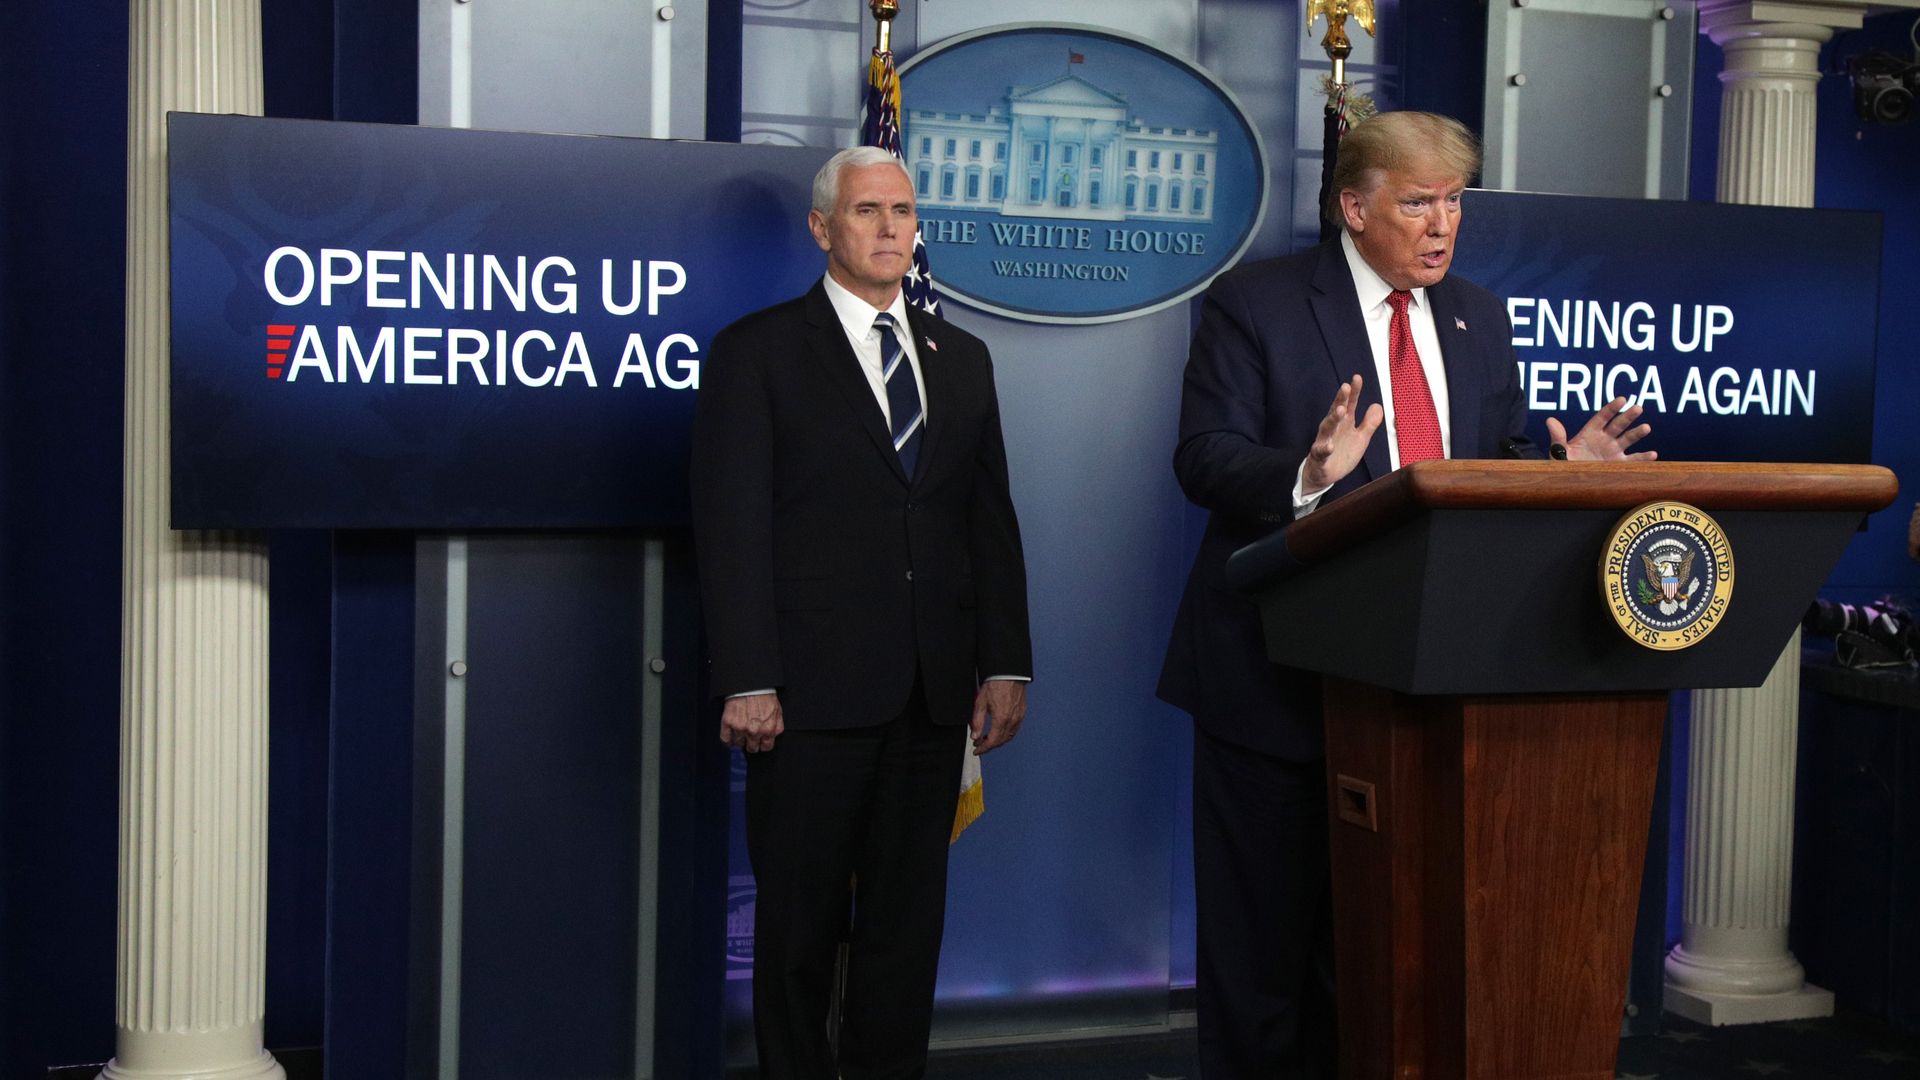 President Donald Trump speaks to press about reopening the economy at the White House while Vice President Mike Pence looks on.